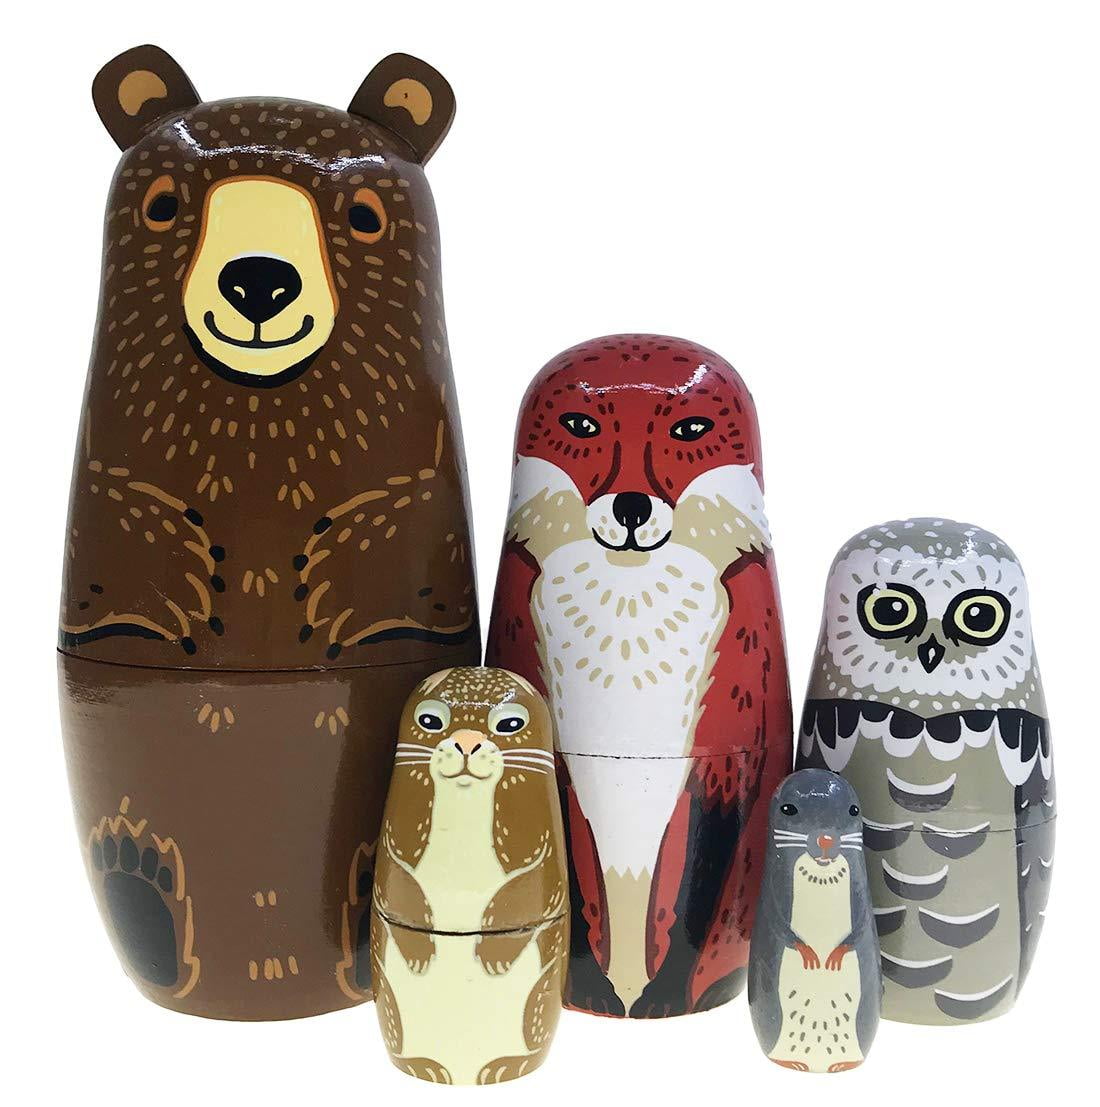 Cute Animal Dog and Friends Nesting Doll Wooden Matryoshka Russian Doll Handmade Stacking Toy Set 5 Pieces For Kids Girl Gifts Home Decoration 